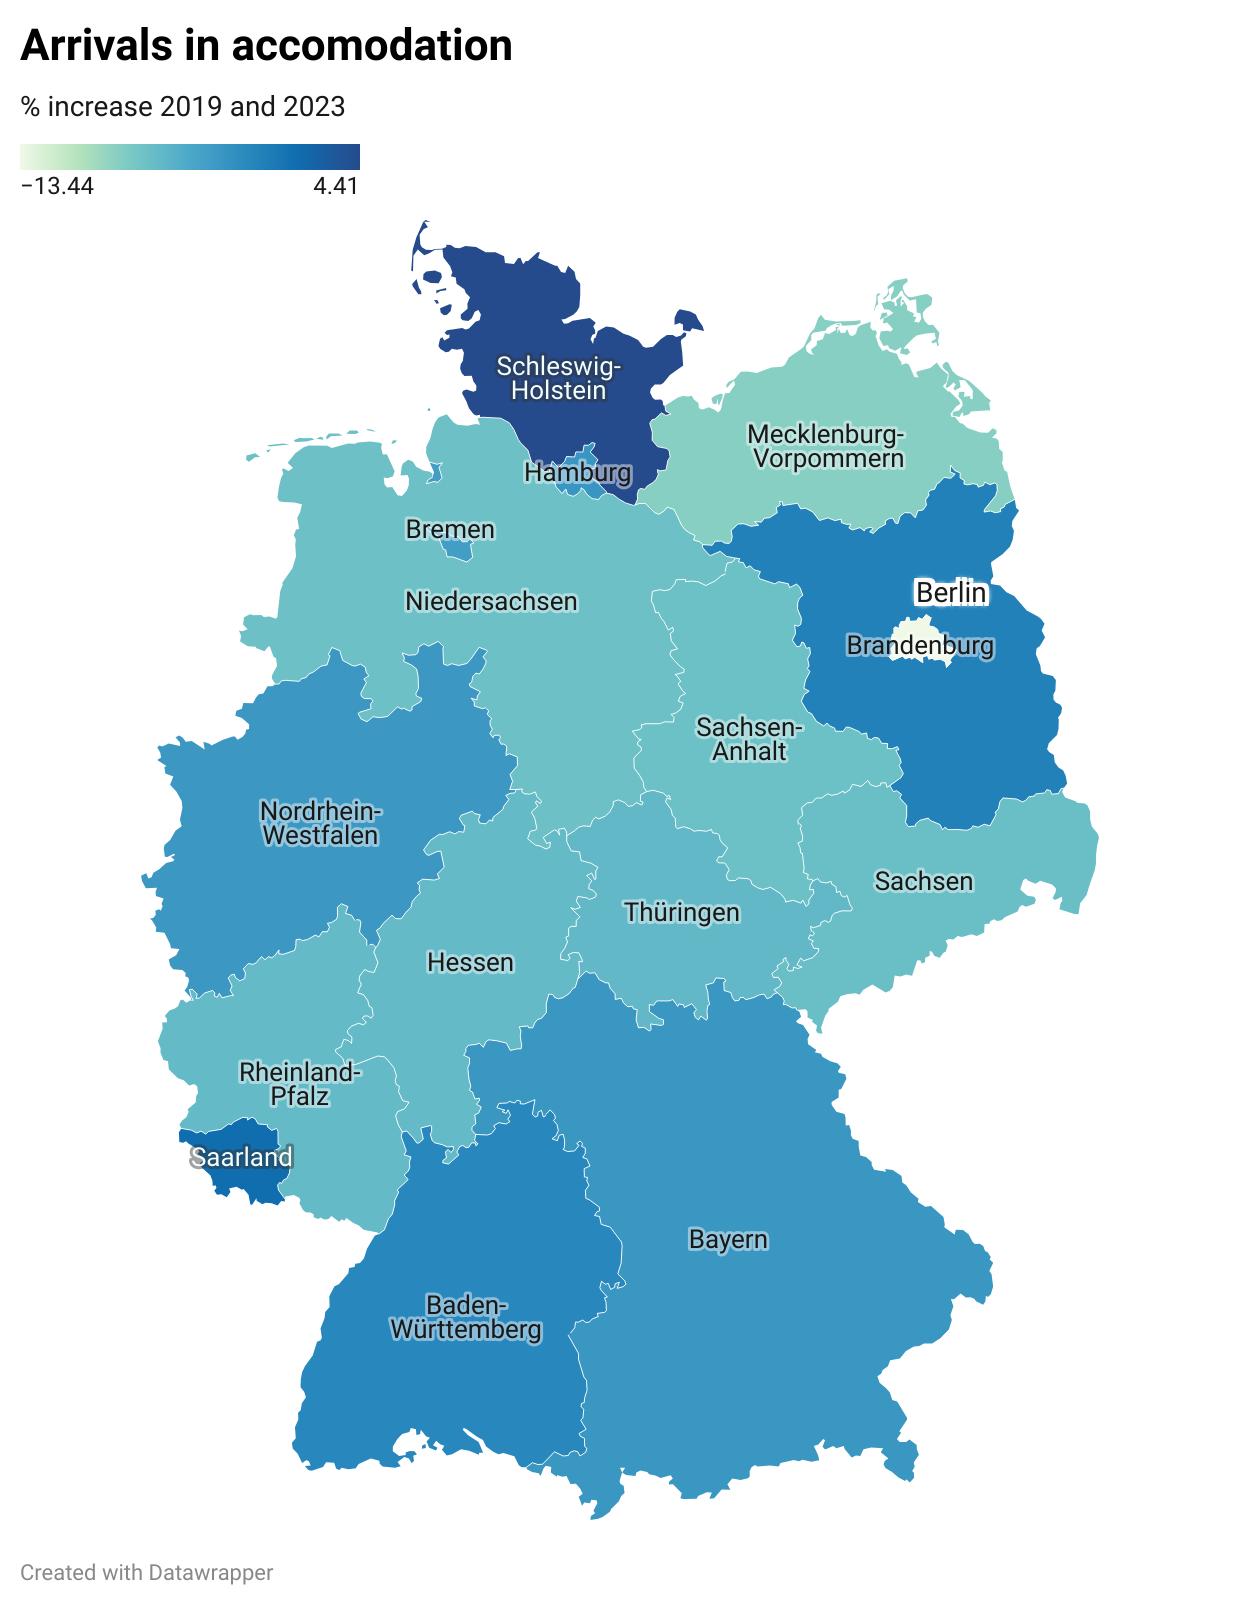 BEONx - Figure 2. Increment (%) of arrivals to Germany between 2019 and 2023. 